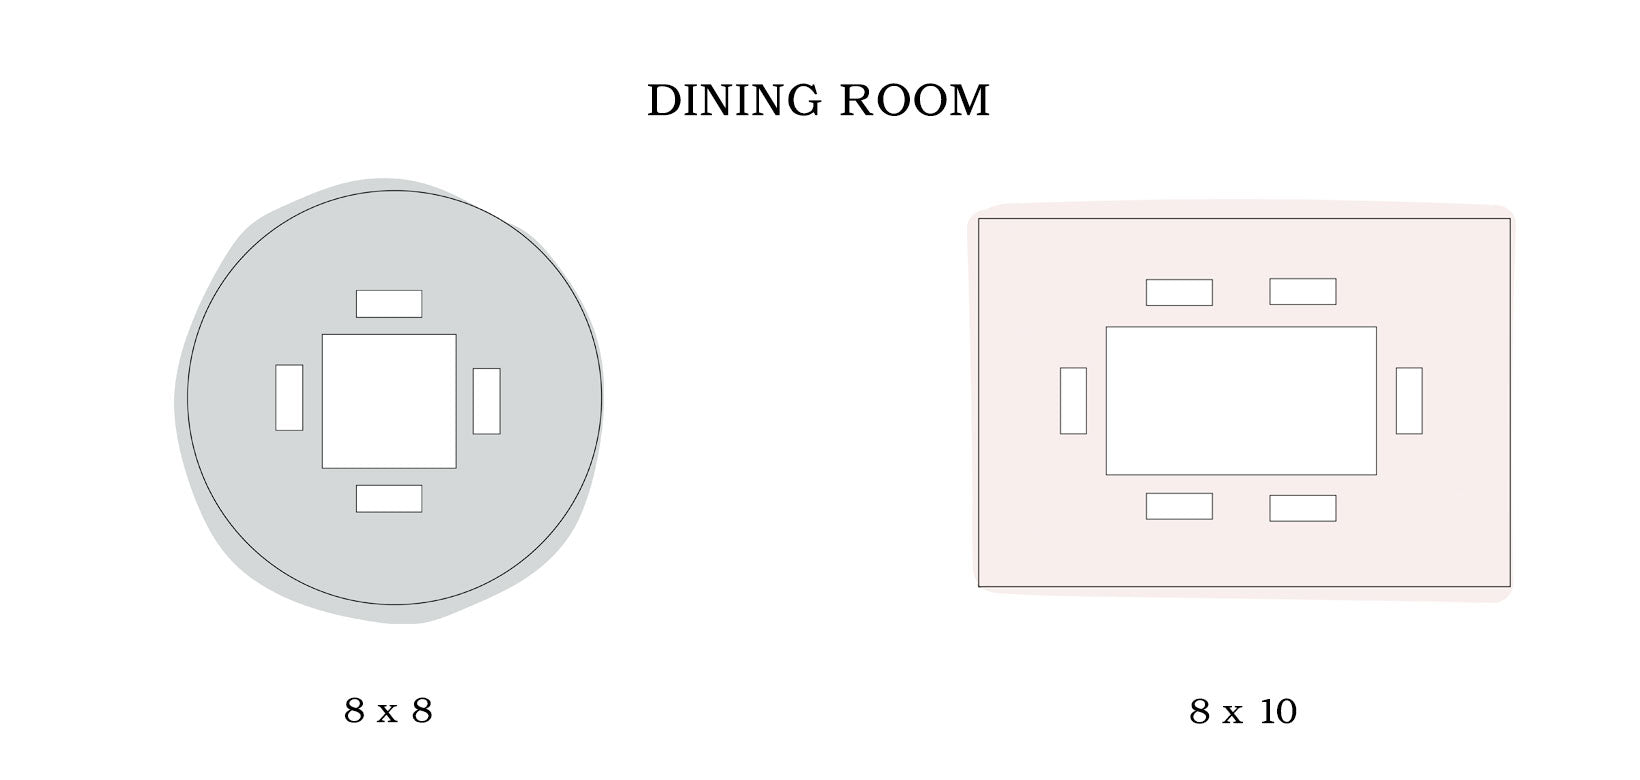 Dining Room Area Rug Sizing